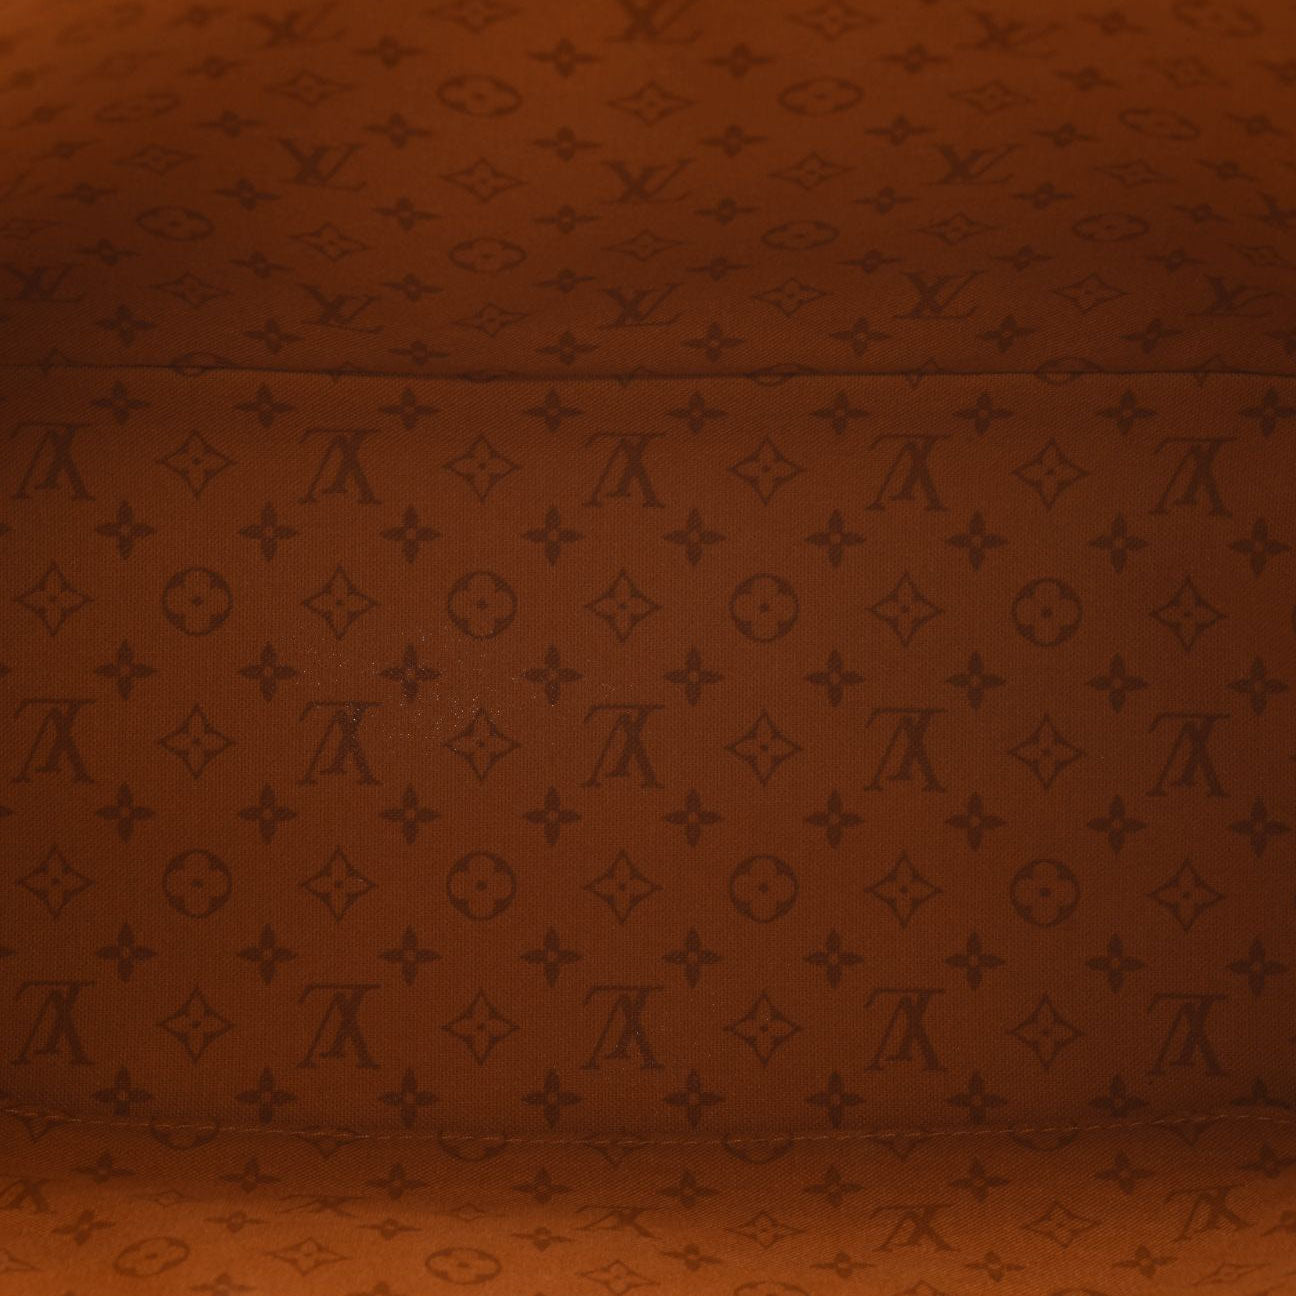 LOUIS VUITTON ONTHEGO GM GIANT JUNGLE MONOGRAM IVORY CARAMEL BAG LIMITED  EDITION